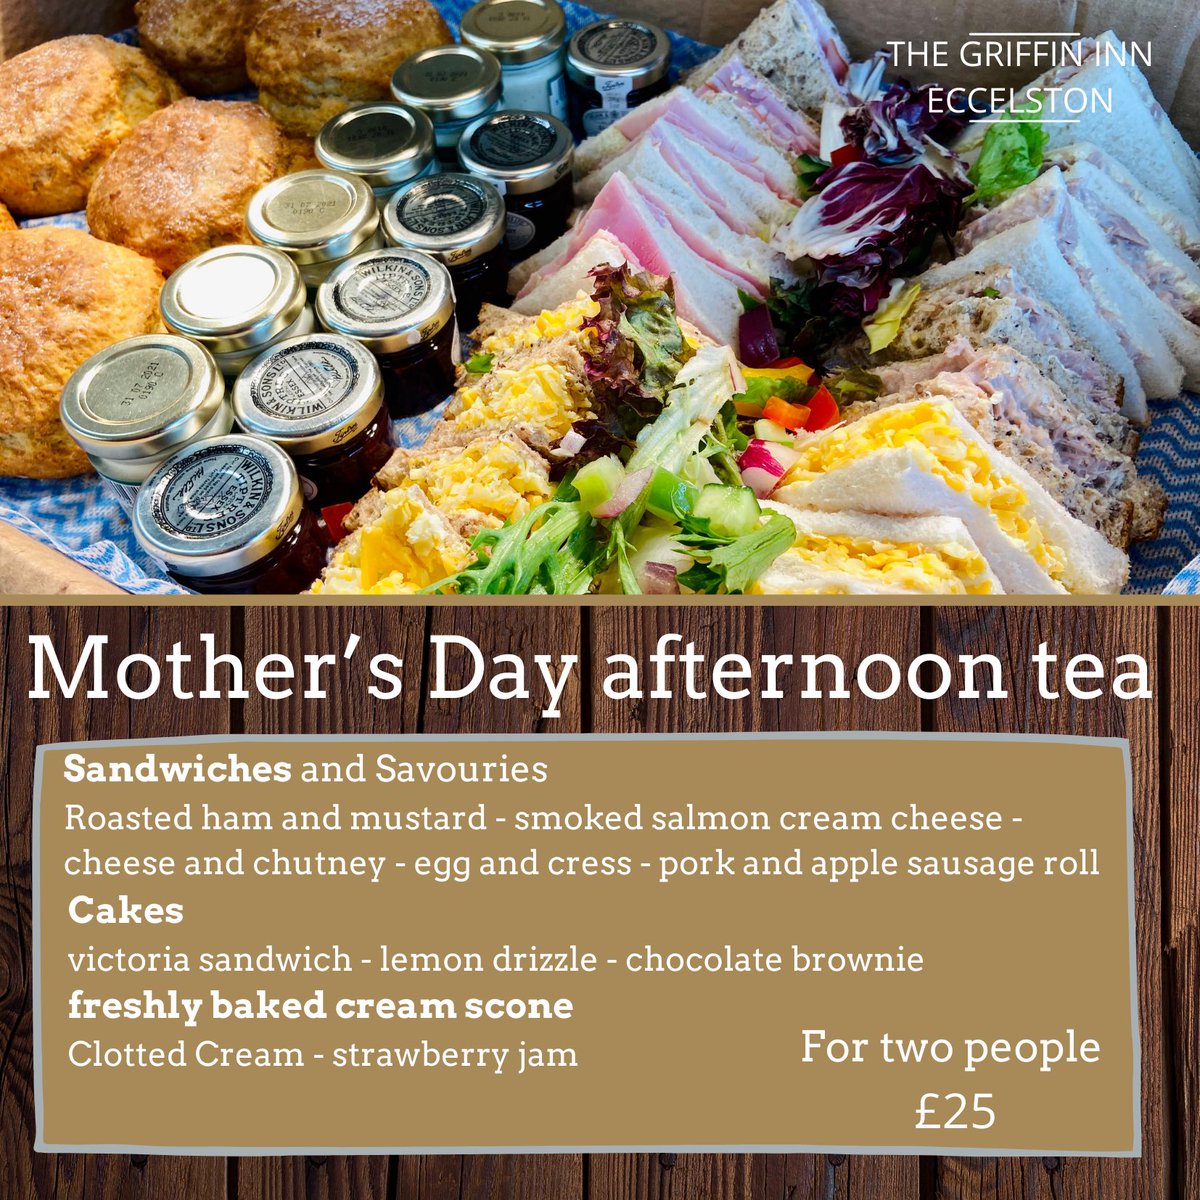 Mother’s days coming why not enjoy our popular Mother’s Day afternoon tea for 2 for £25 collection from 11am on the 14th of March, message us to order yours cut off for orders Is Friday at 12pm. #food #afternoontea #mothersday. #mothersdayafternoontea #goodvibes